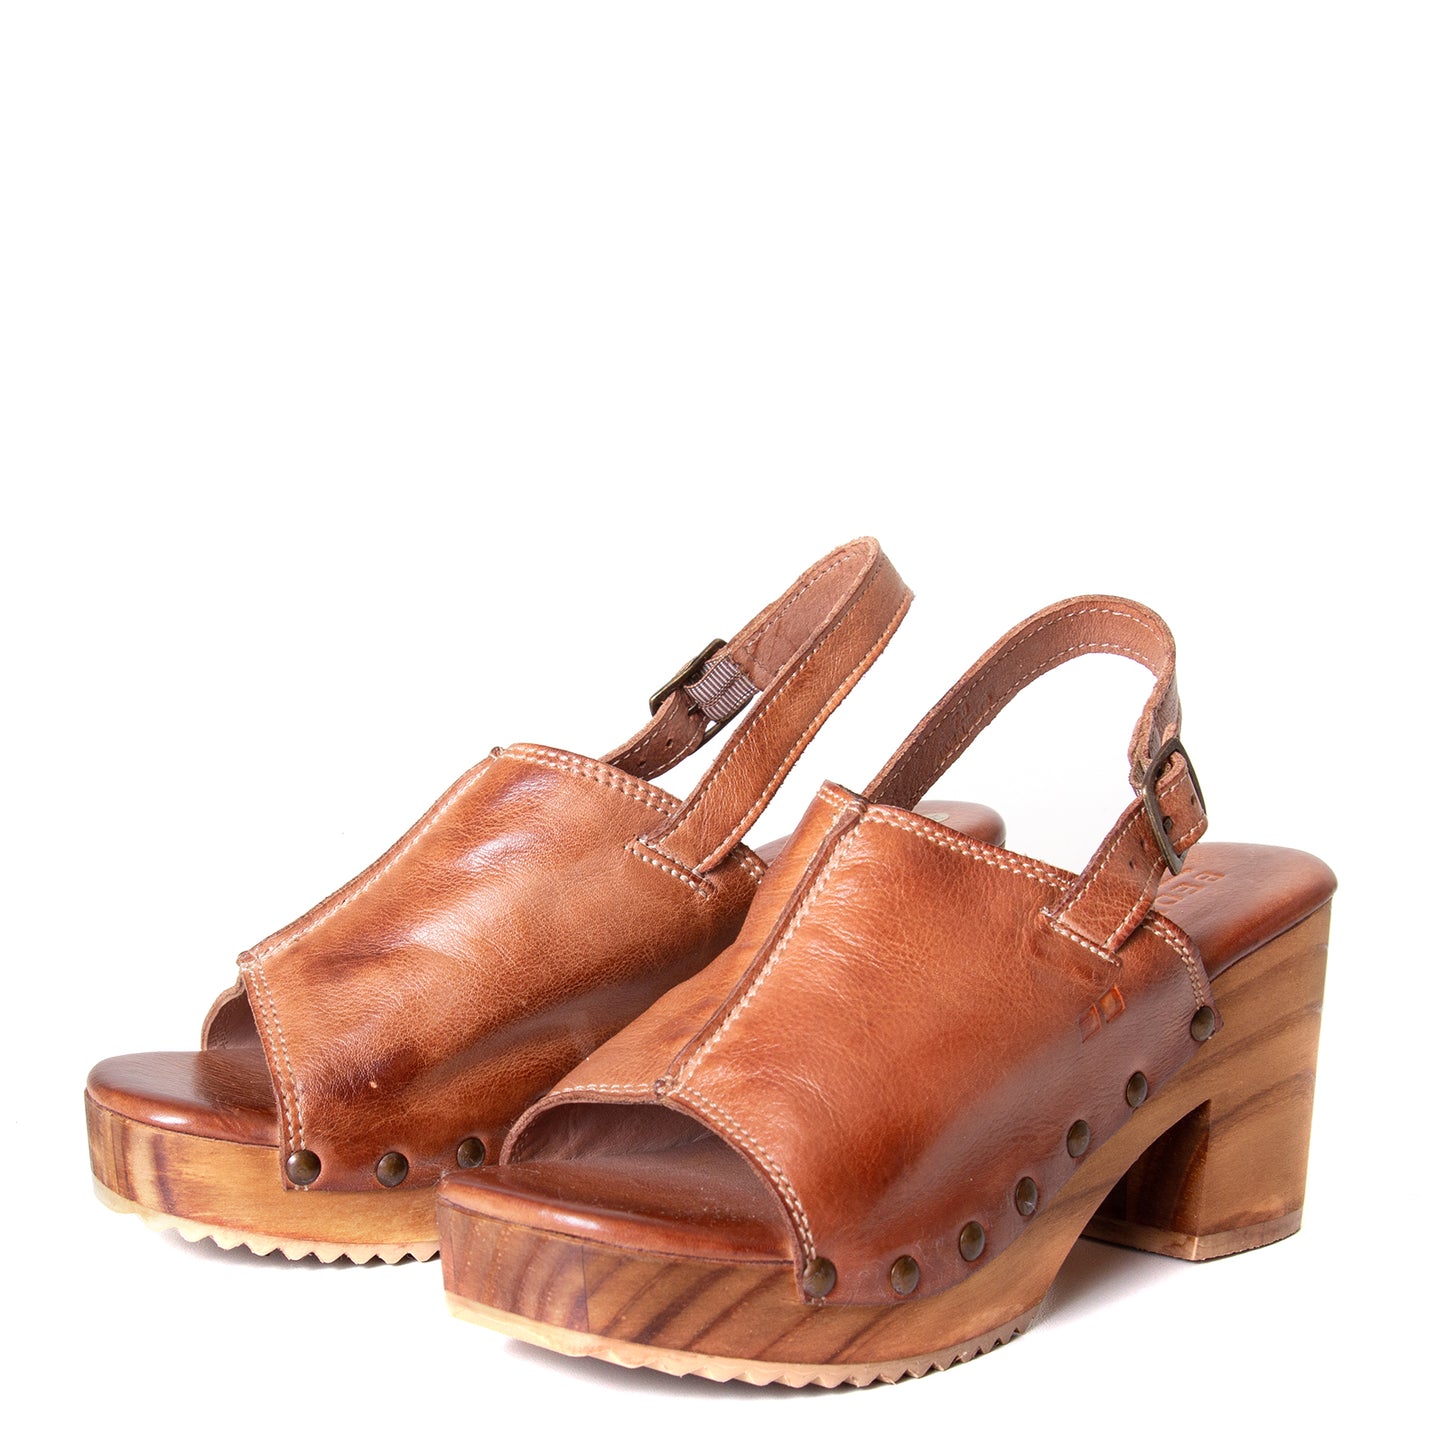 Bed Stu Marie. Women's wooden clog in tan leather, with slingback. Front view, pair.